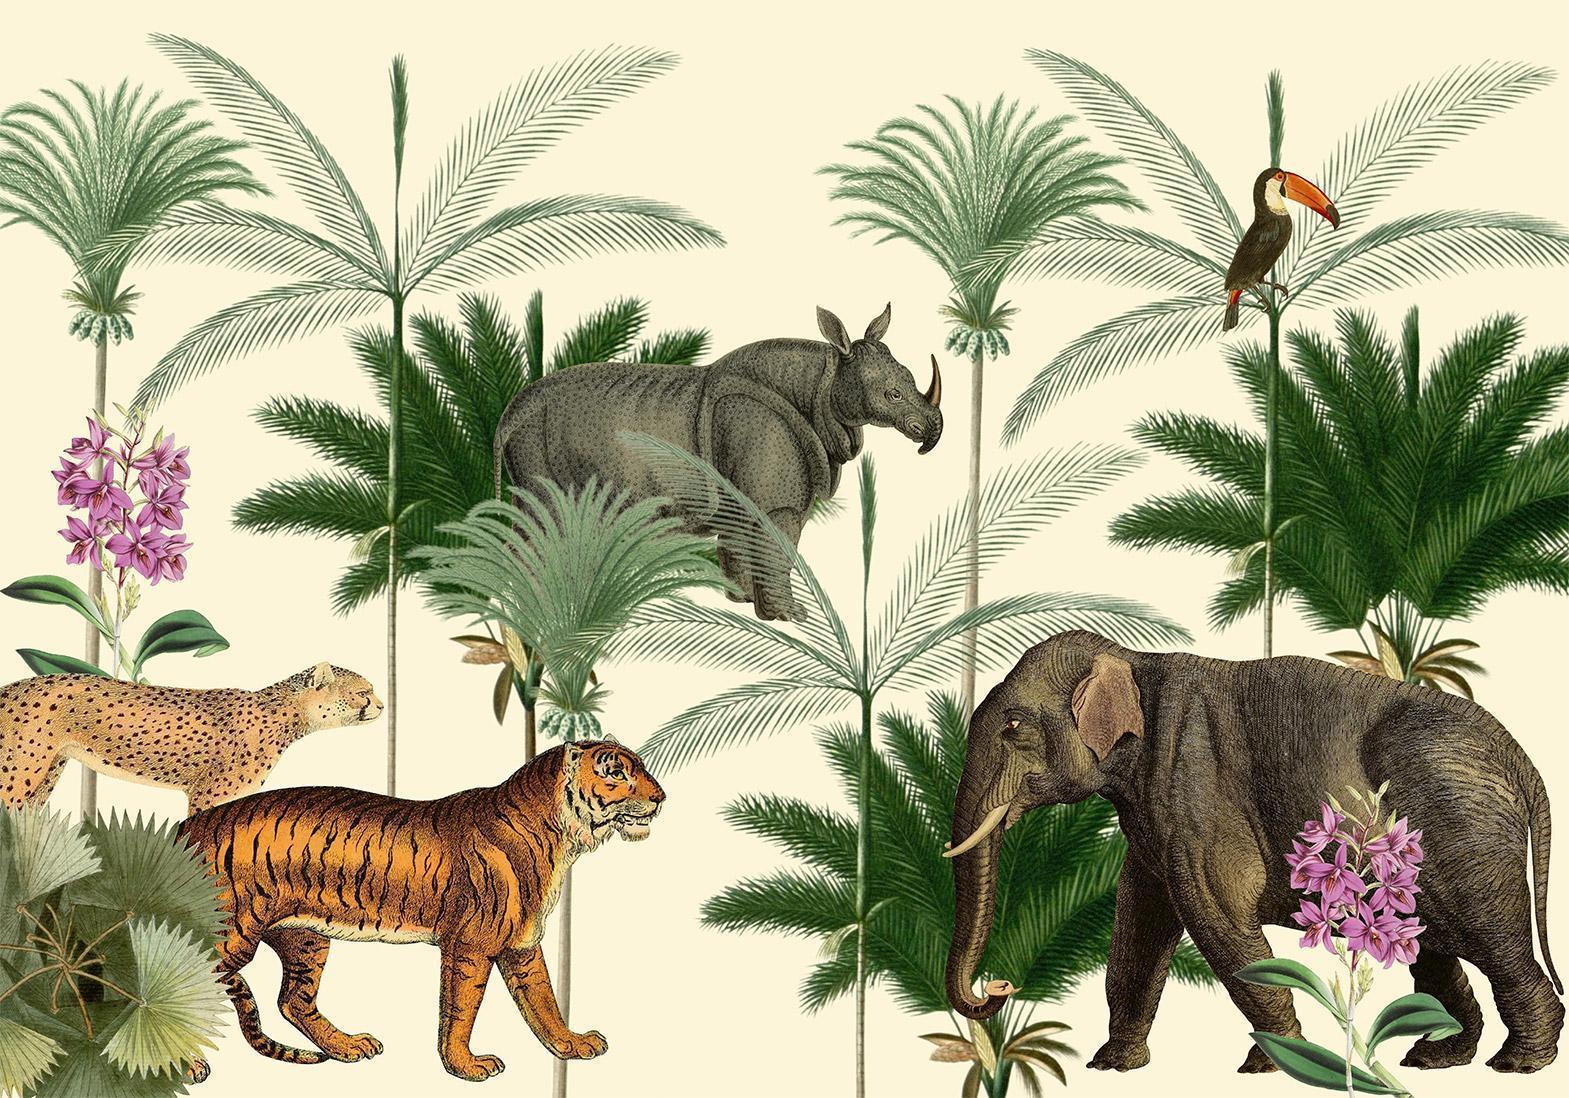 Papier peint - Jungle Land With Animals in the Style of Old Engravings